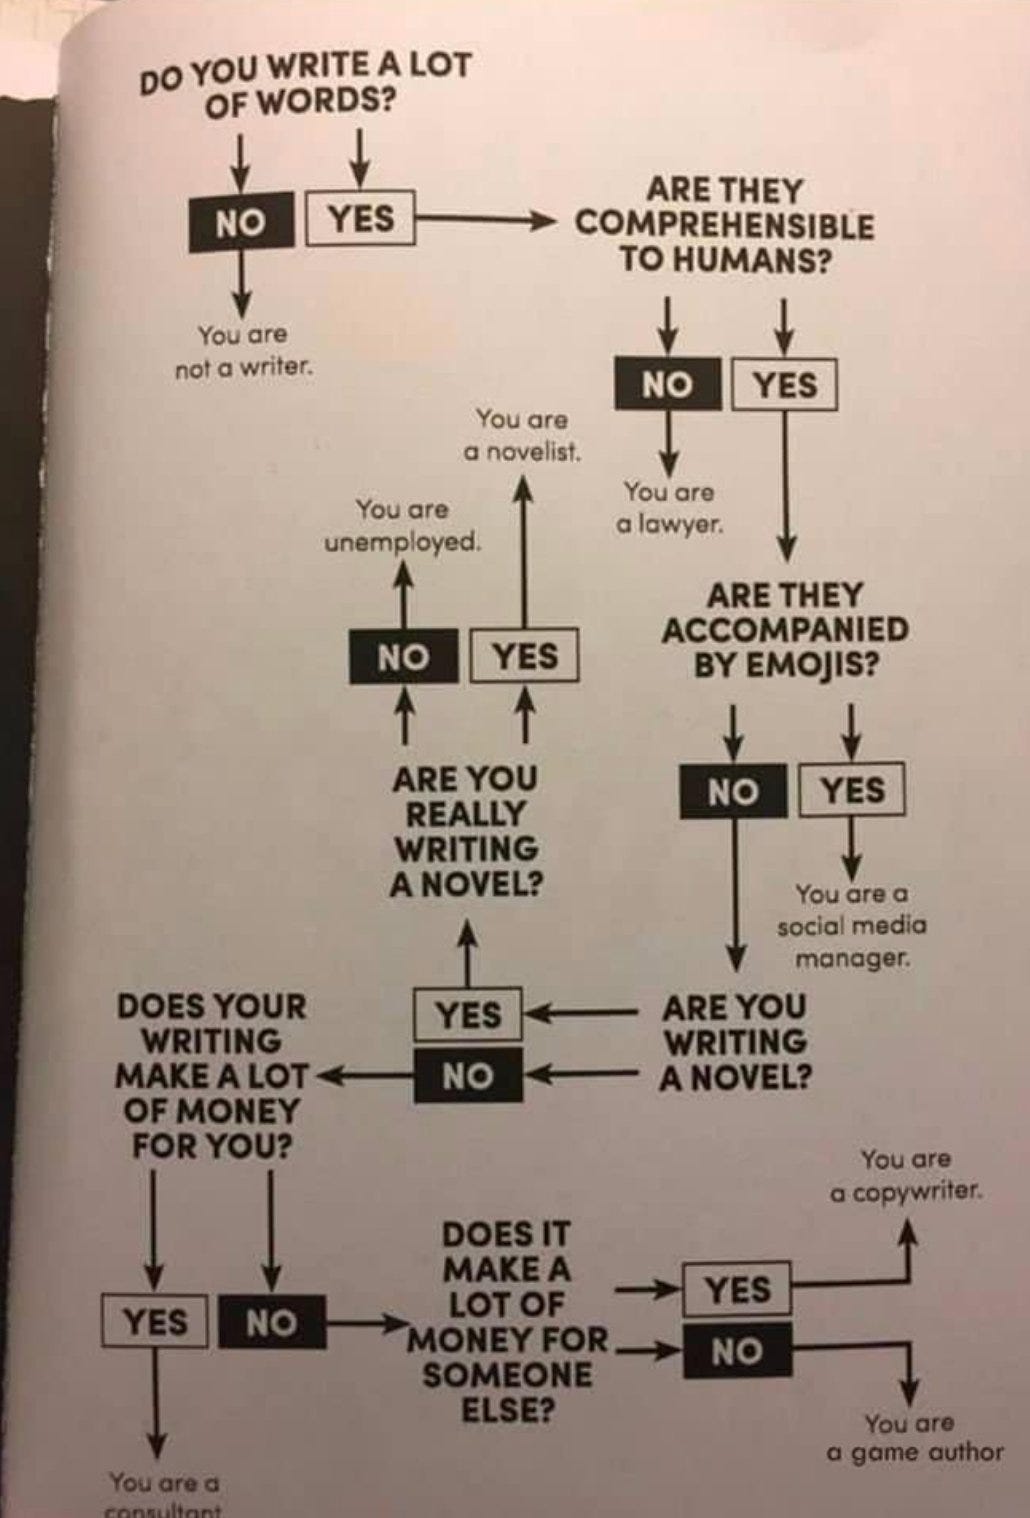 A weird flow chart that's supposed to tell you what kind of writer you are. 